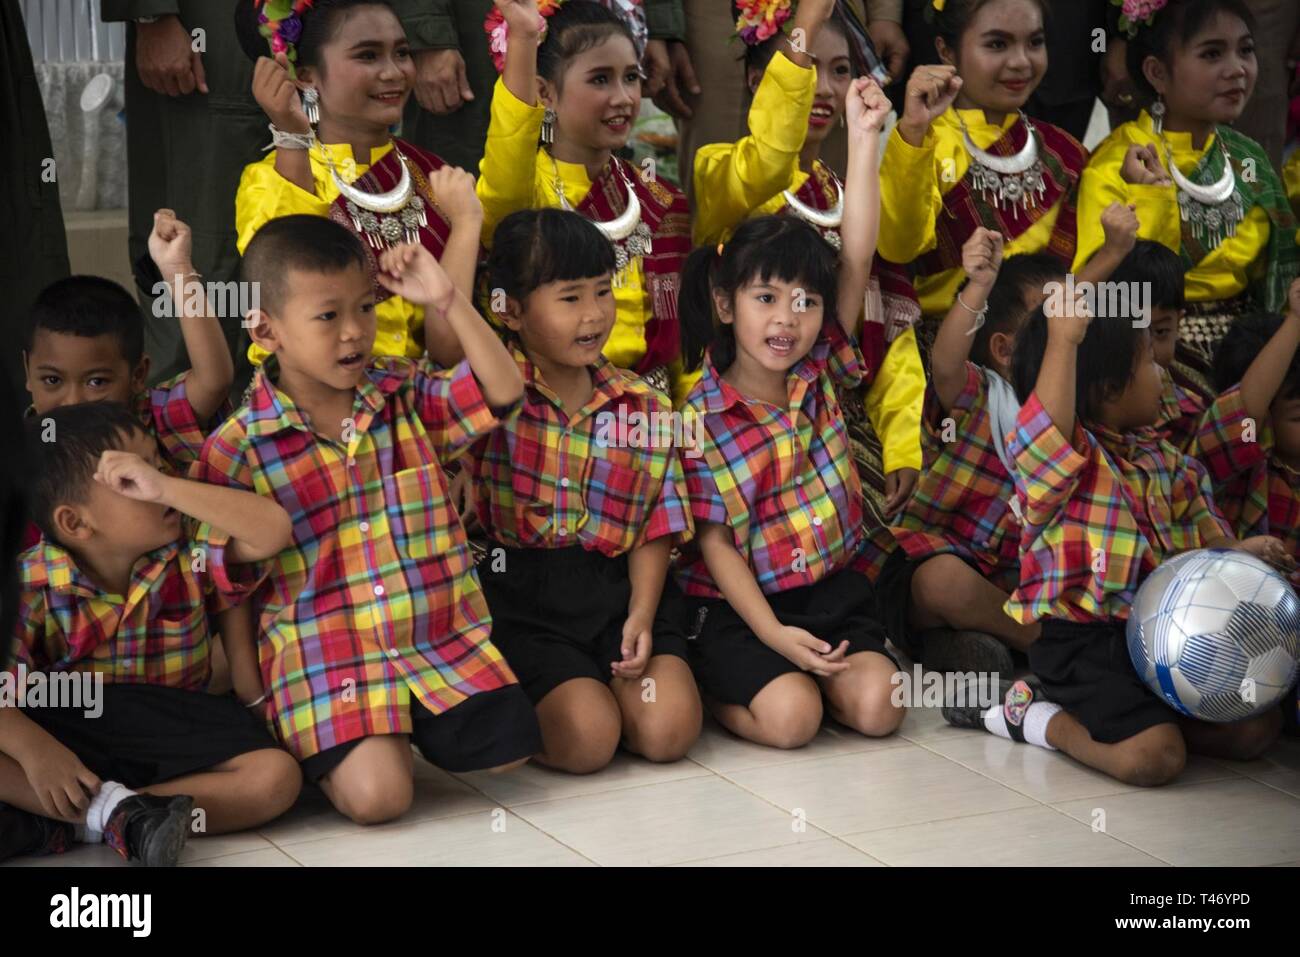 Ban PaLai School children cheer after receiving donations from the U.S., Royal Thai and Singaporean air forces during a COPE Tiger 2019 cultural exchange at Korat, Thailand, March 13, 2019. The school received books, school supplies, sports equipment, and a dish washing system from the three partner nations to support their educational and health needs. Stock Photo